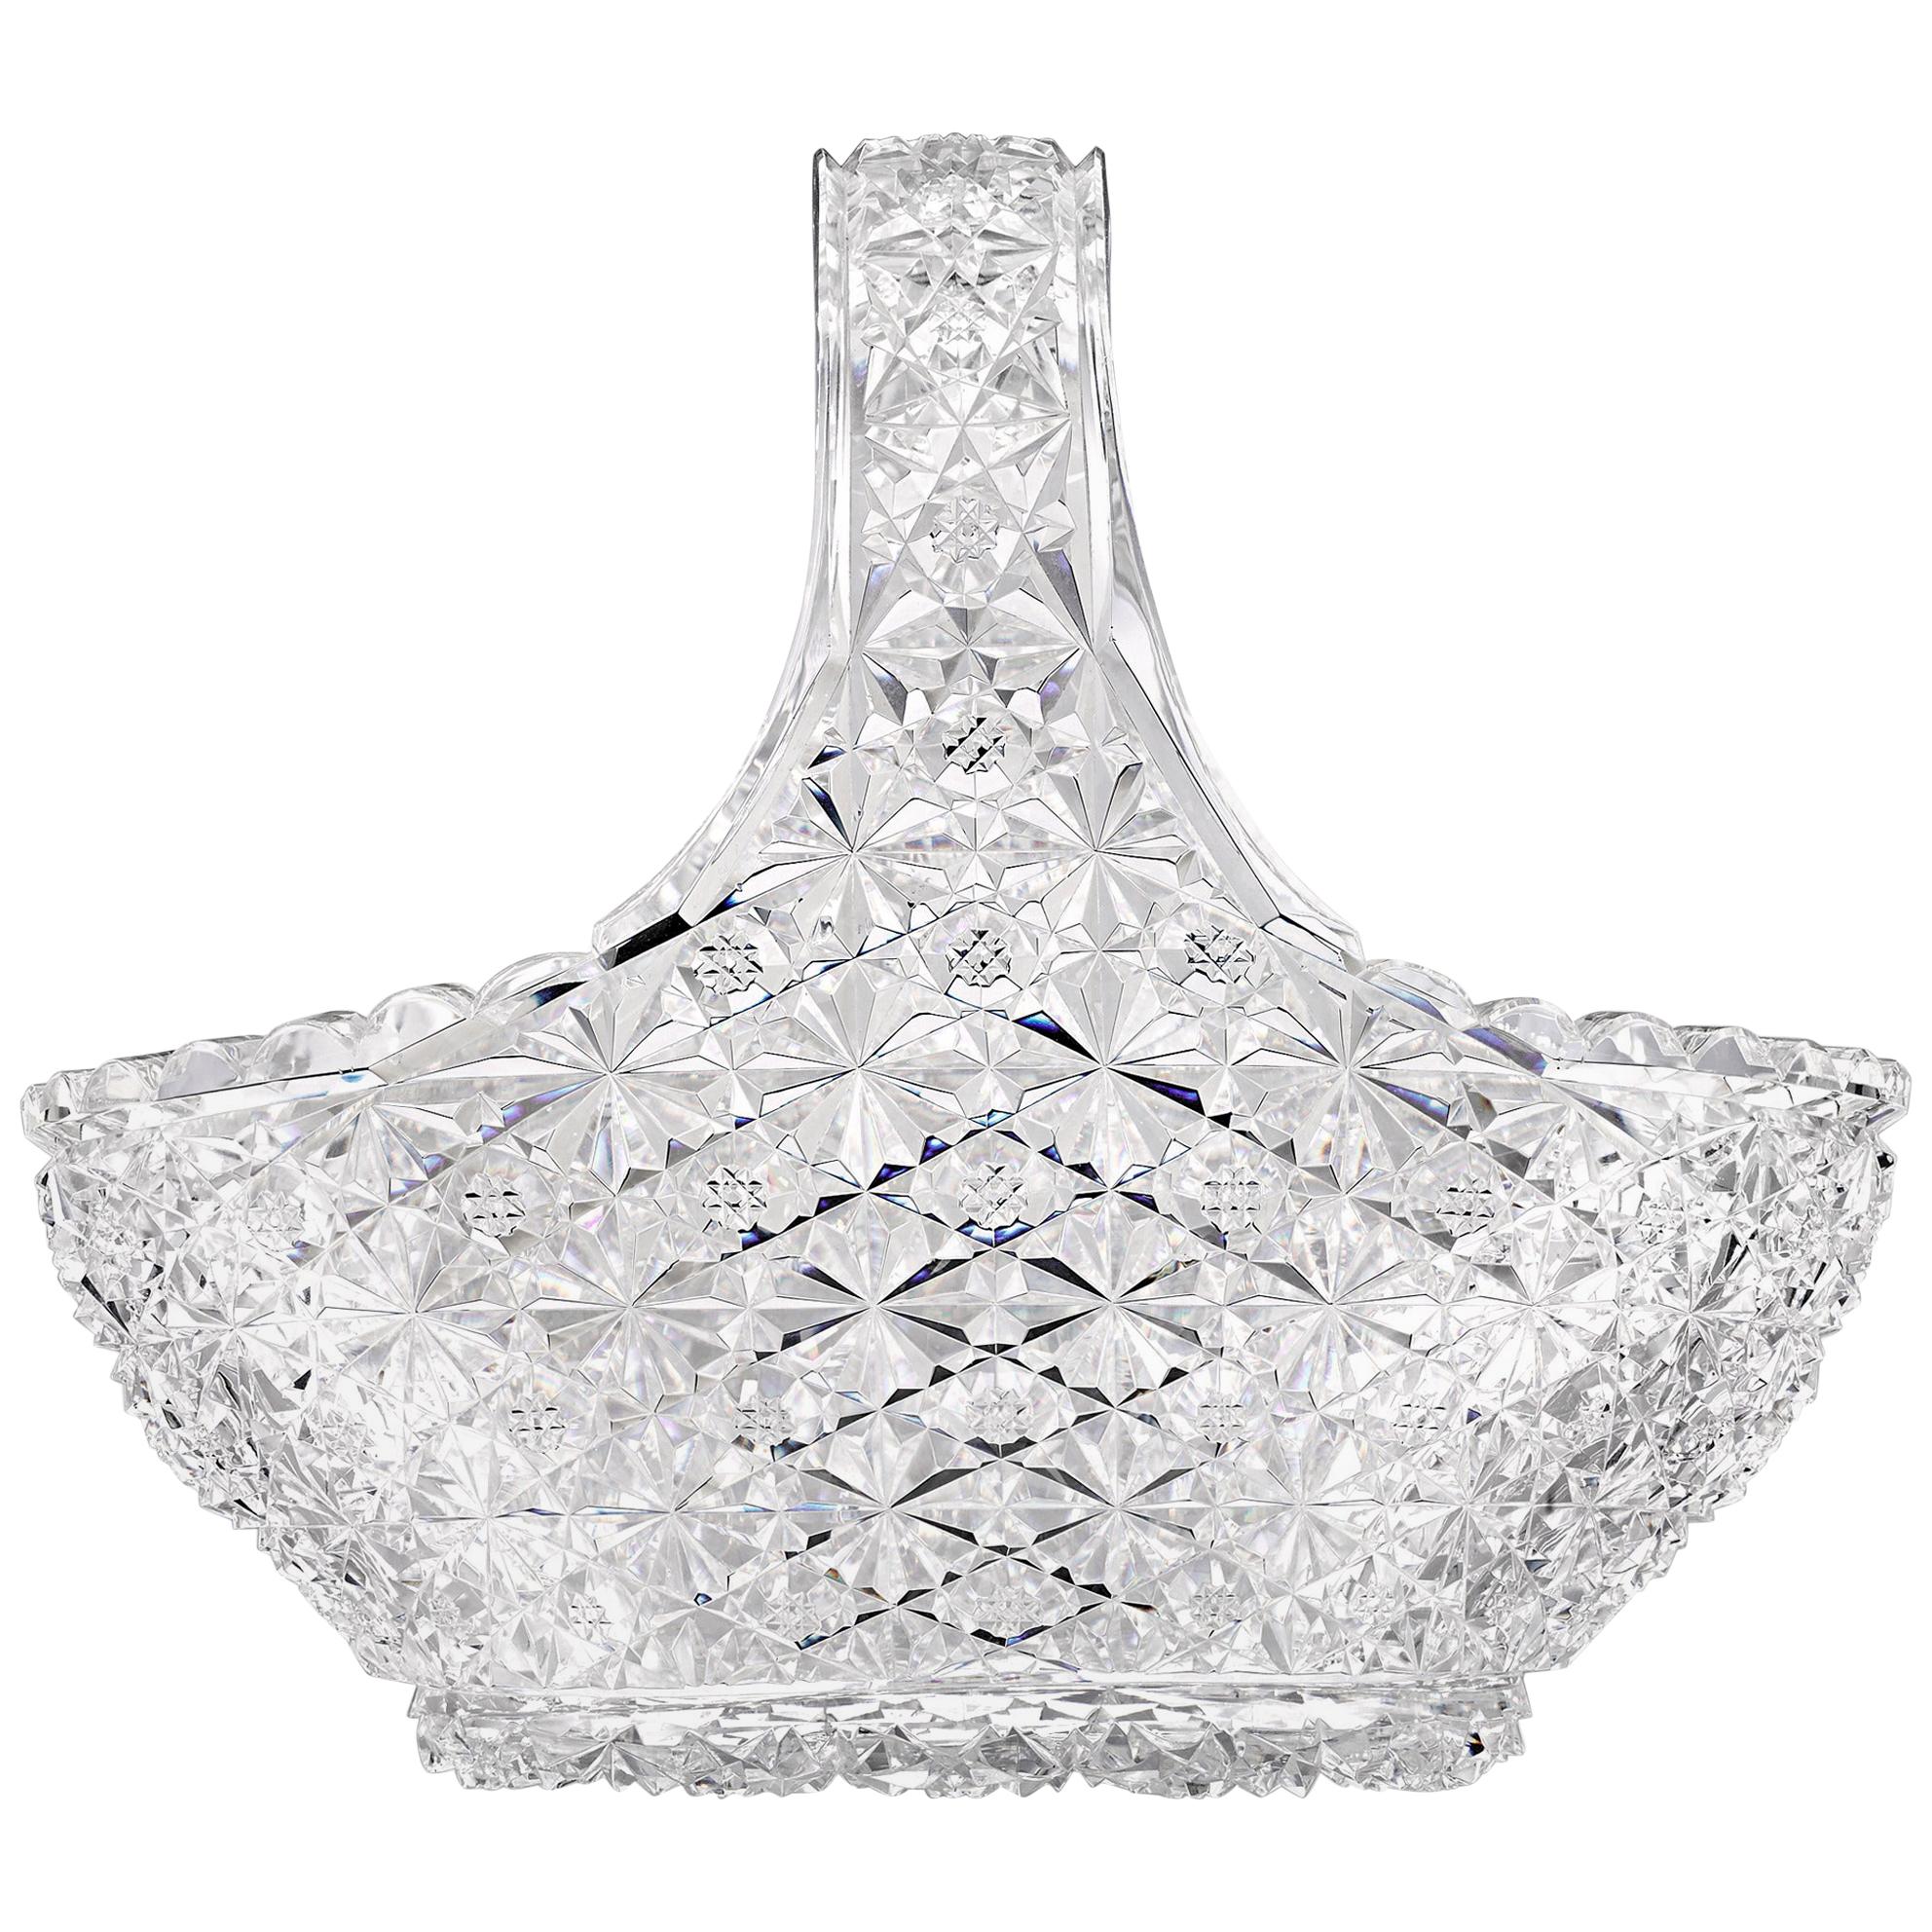 Complex, intricate cuts cover the entire surface of this stunning cut glass basket featuring the exotic Persian variation of the Russian pattern. American Brilliant period cut-glass won world acclaim in the 19th and 20th centuries, recognized for